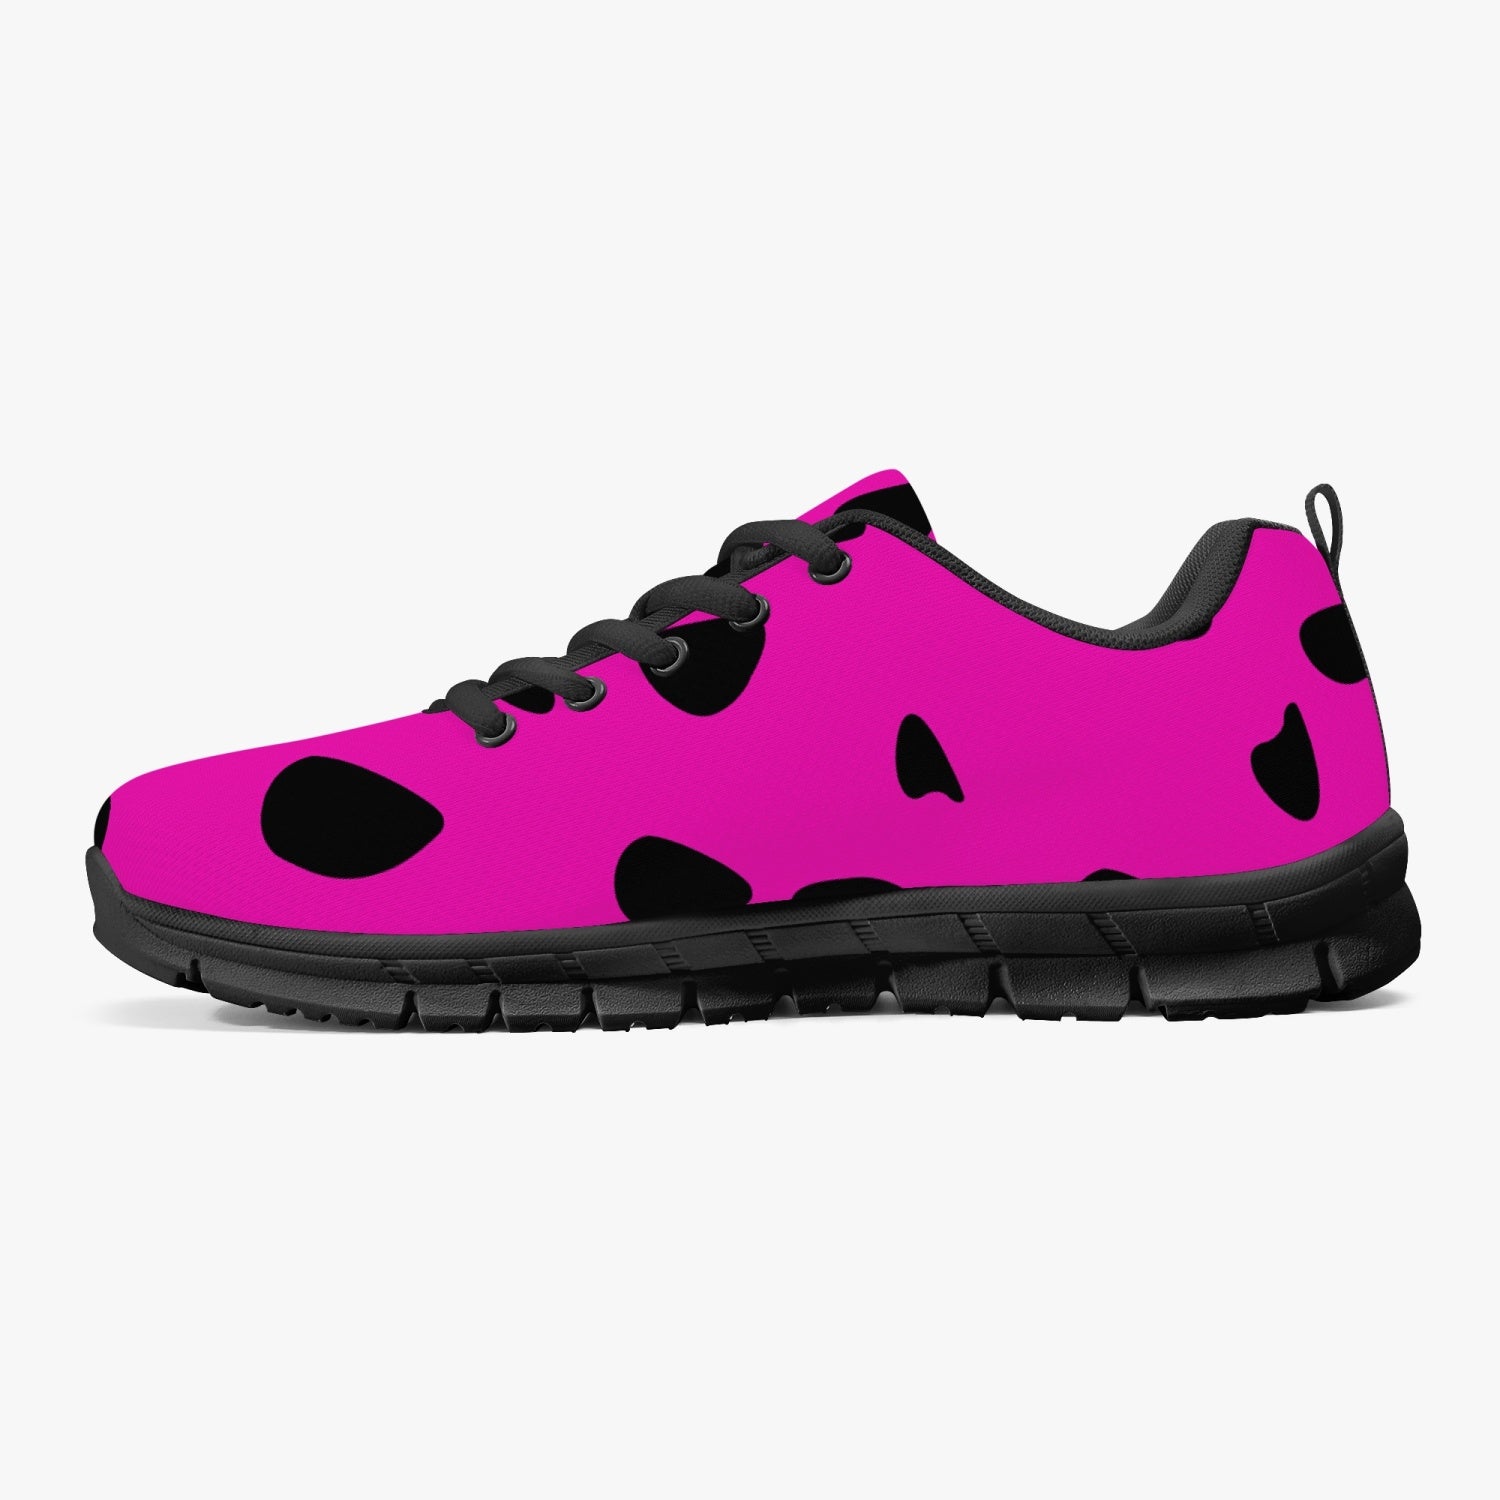 Pink Cave Woman Sneakers